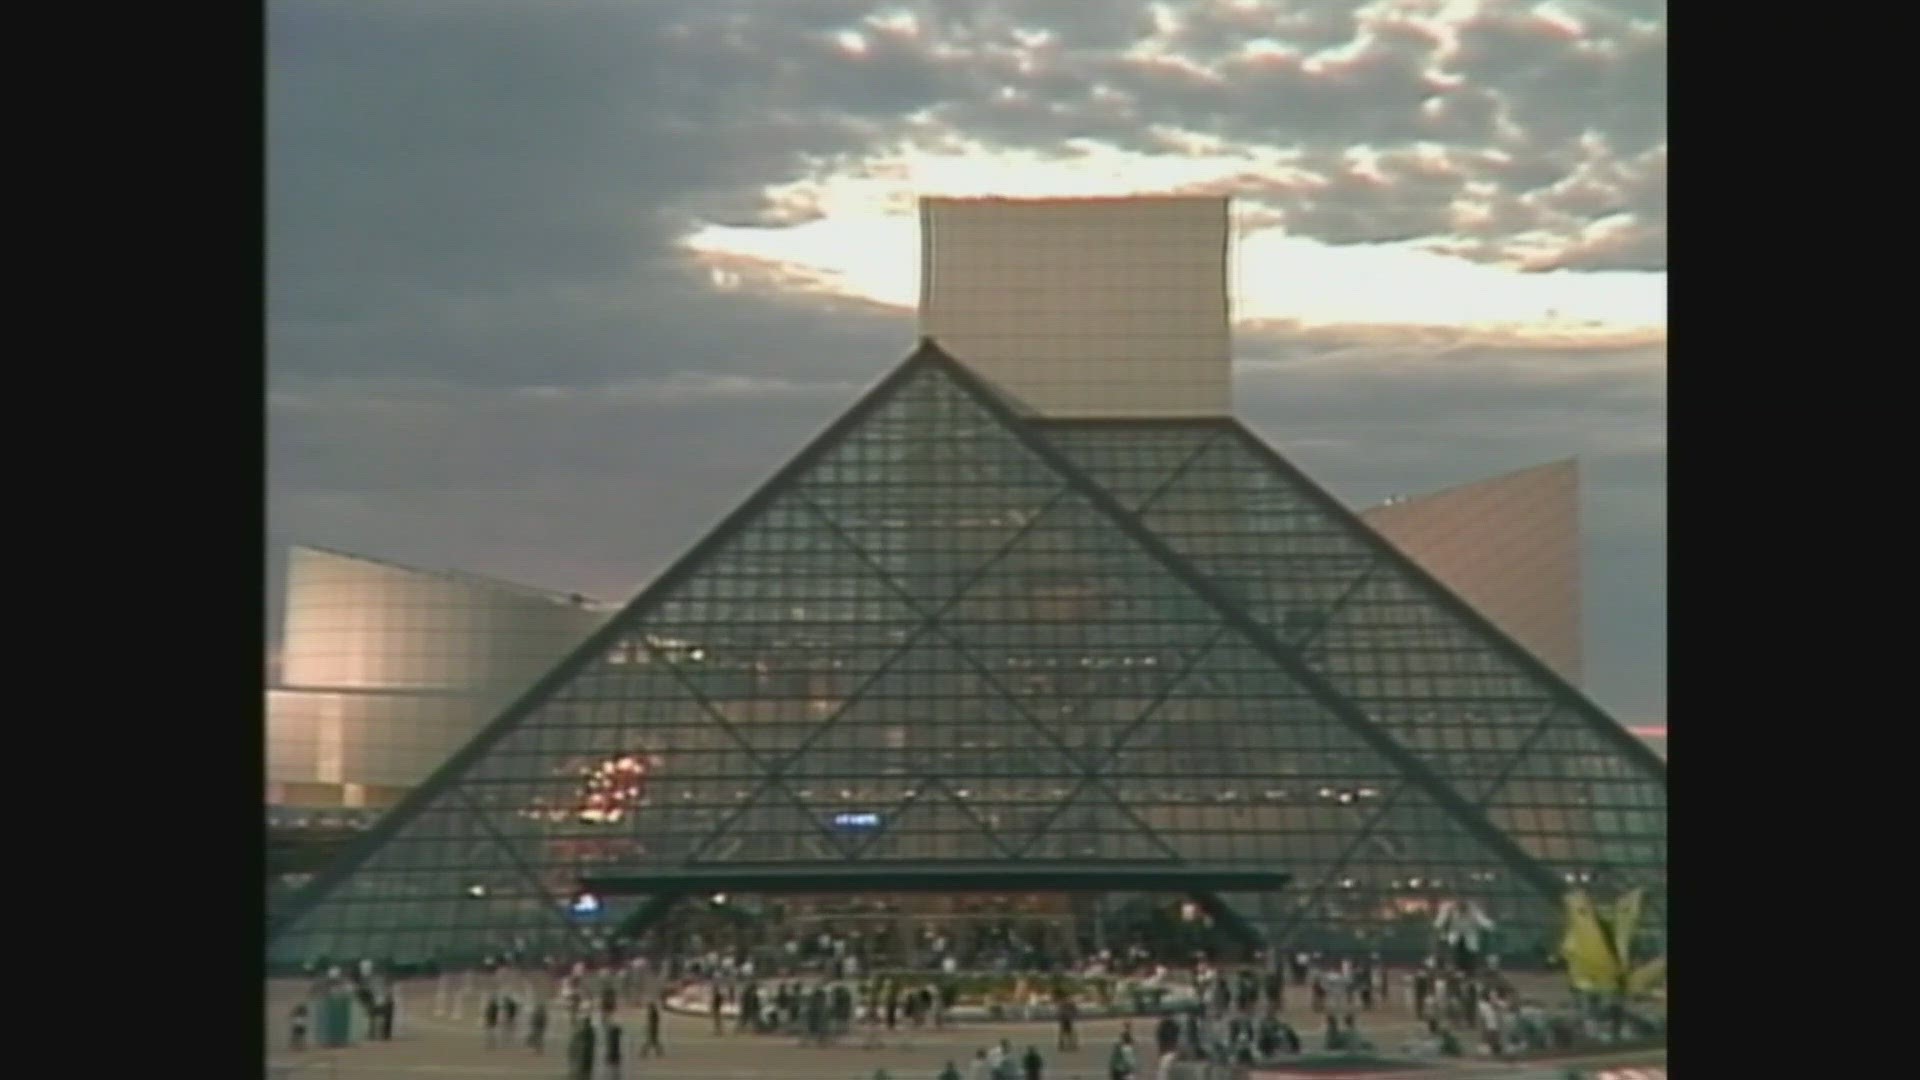 3News' Austin Love is taking a look at the history of the Rock and Roll Hall of Fame ahead of the 2023 induction ceremony.